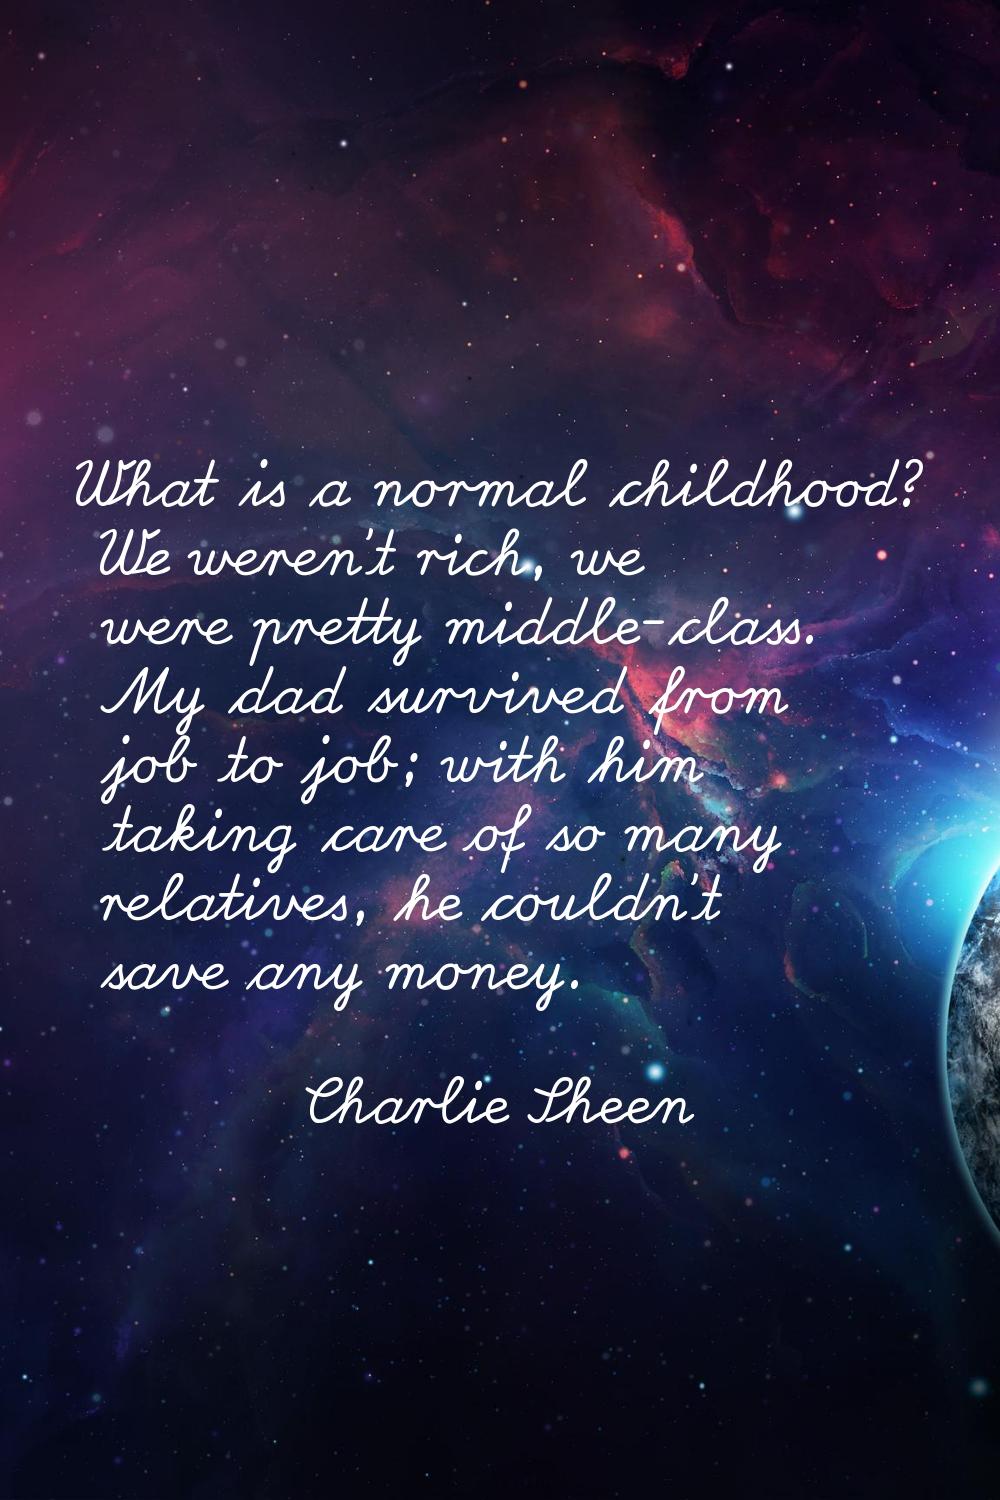 What is a normal childhood? We weren't rich, we were pretty middle-class. My dad survived from job 